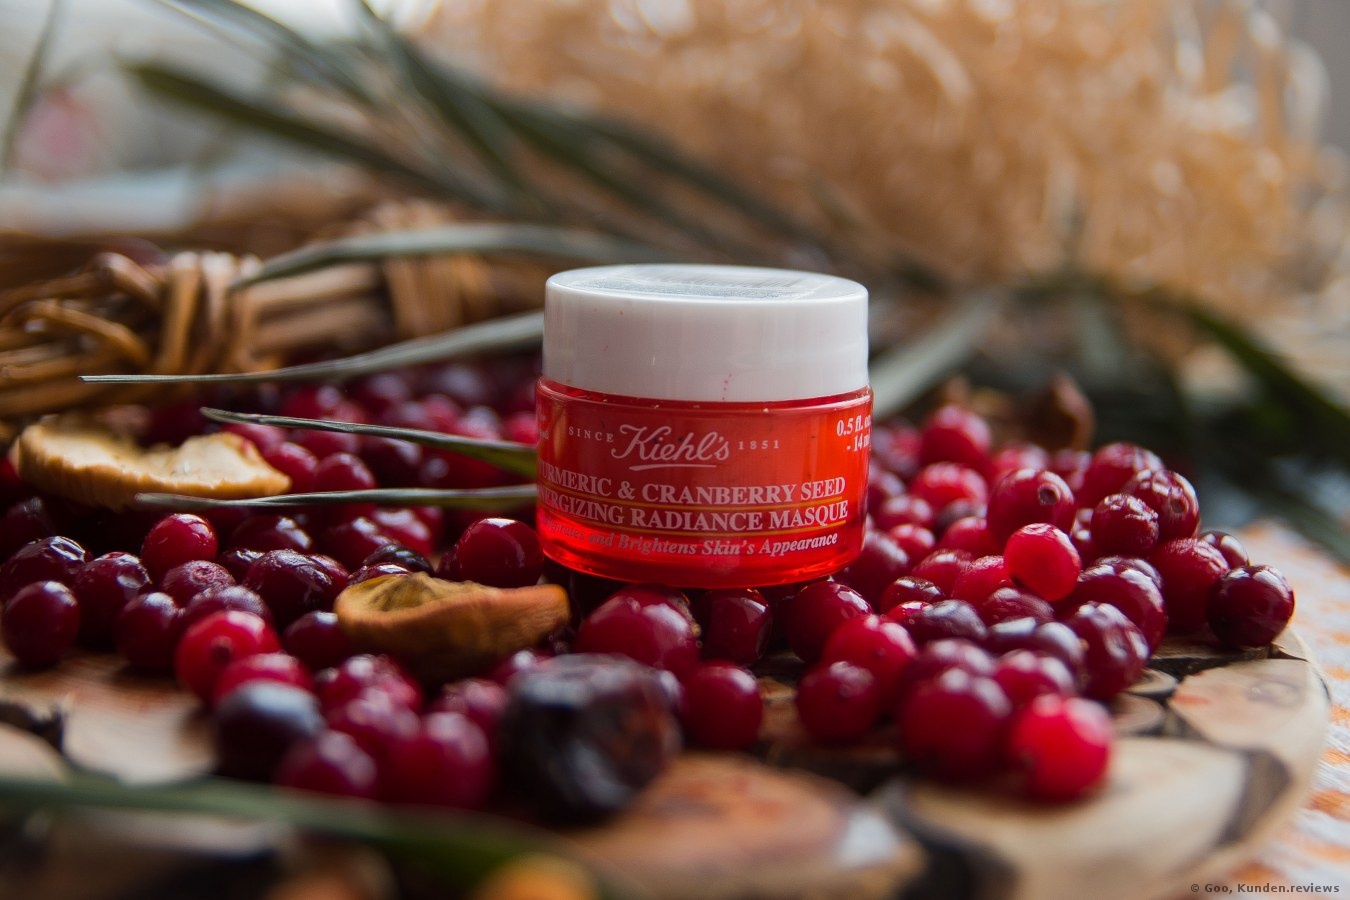  KIEHL'S Turmeric & cranberry seed energizing radiance masque